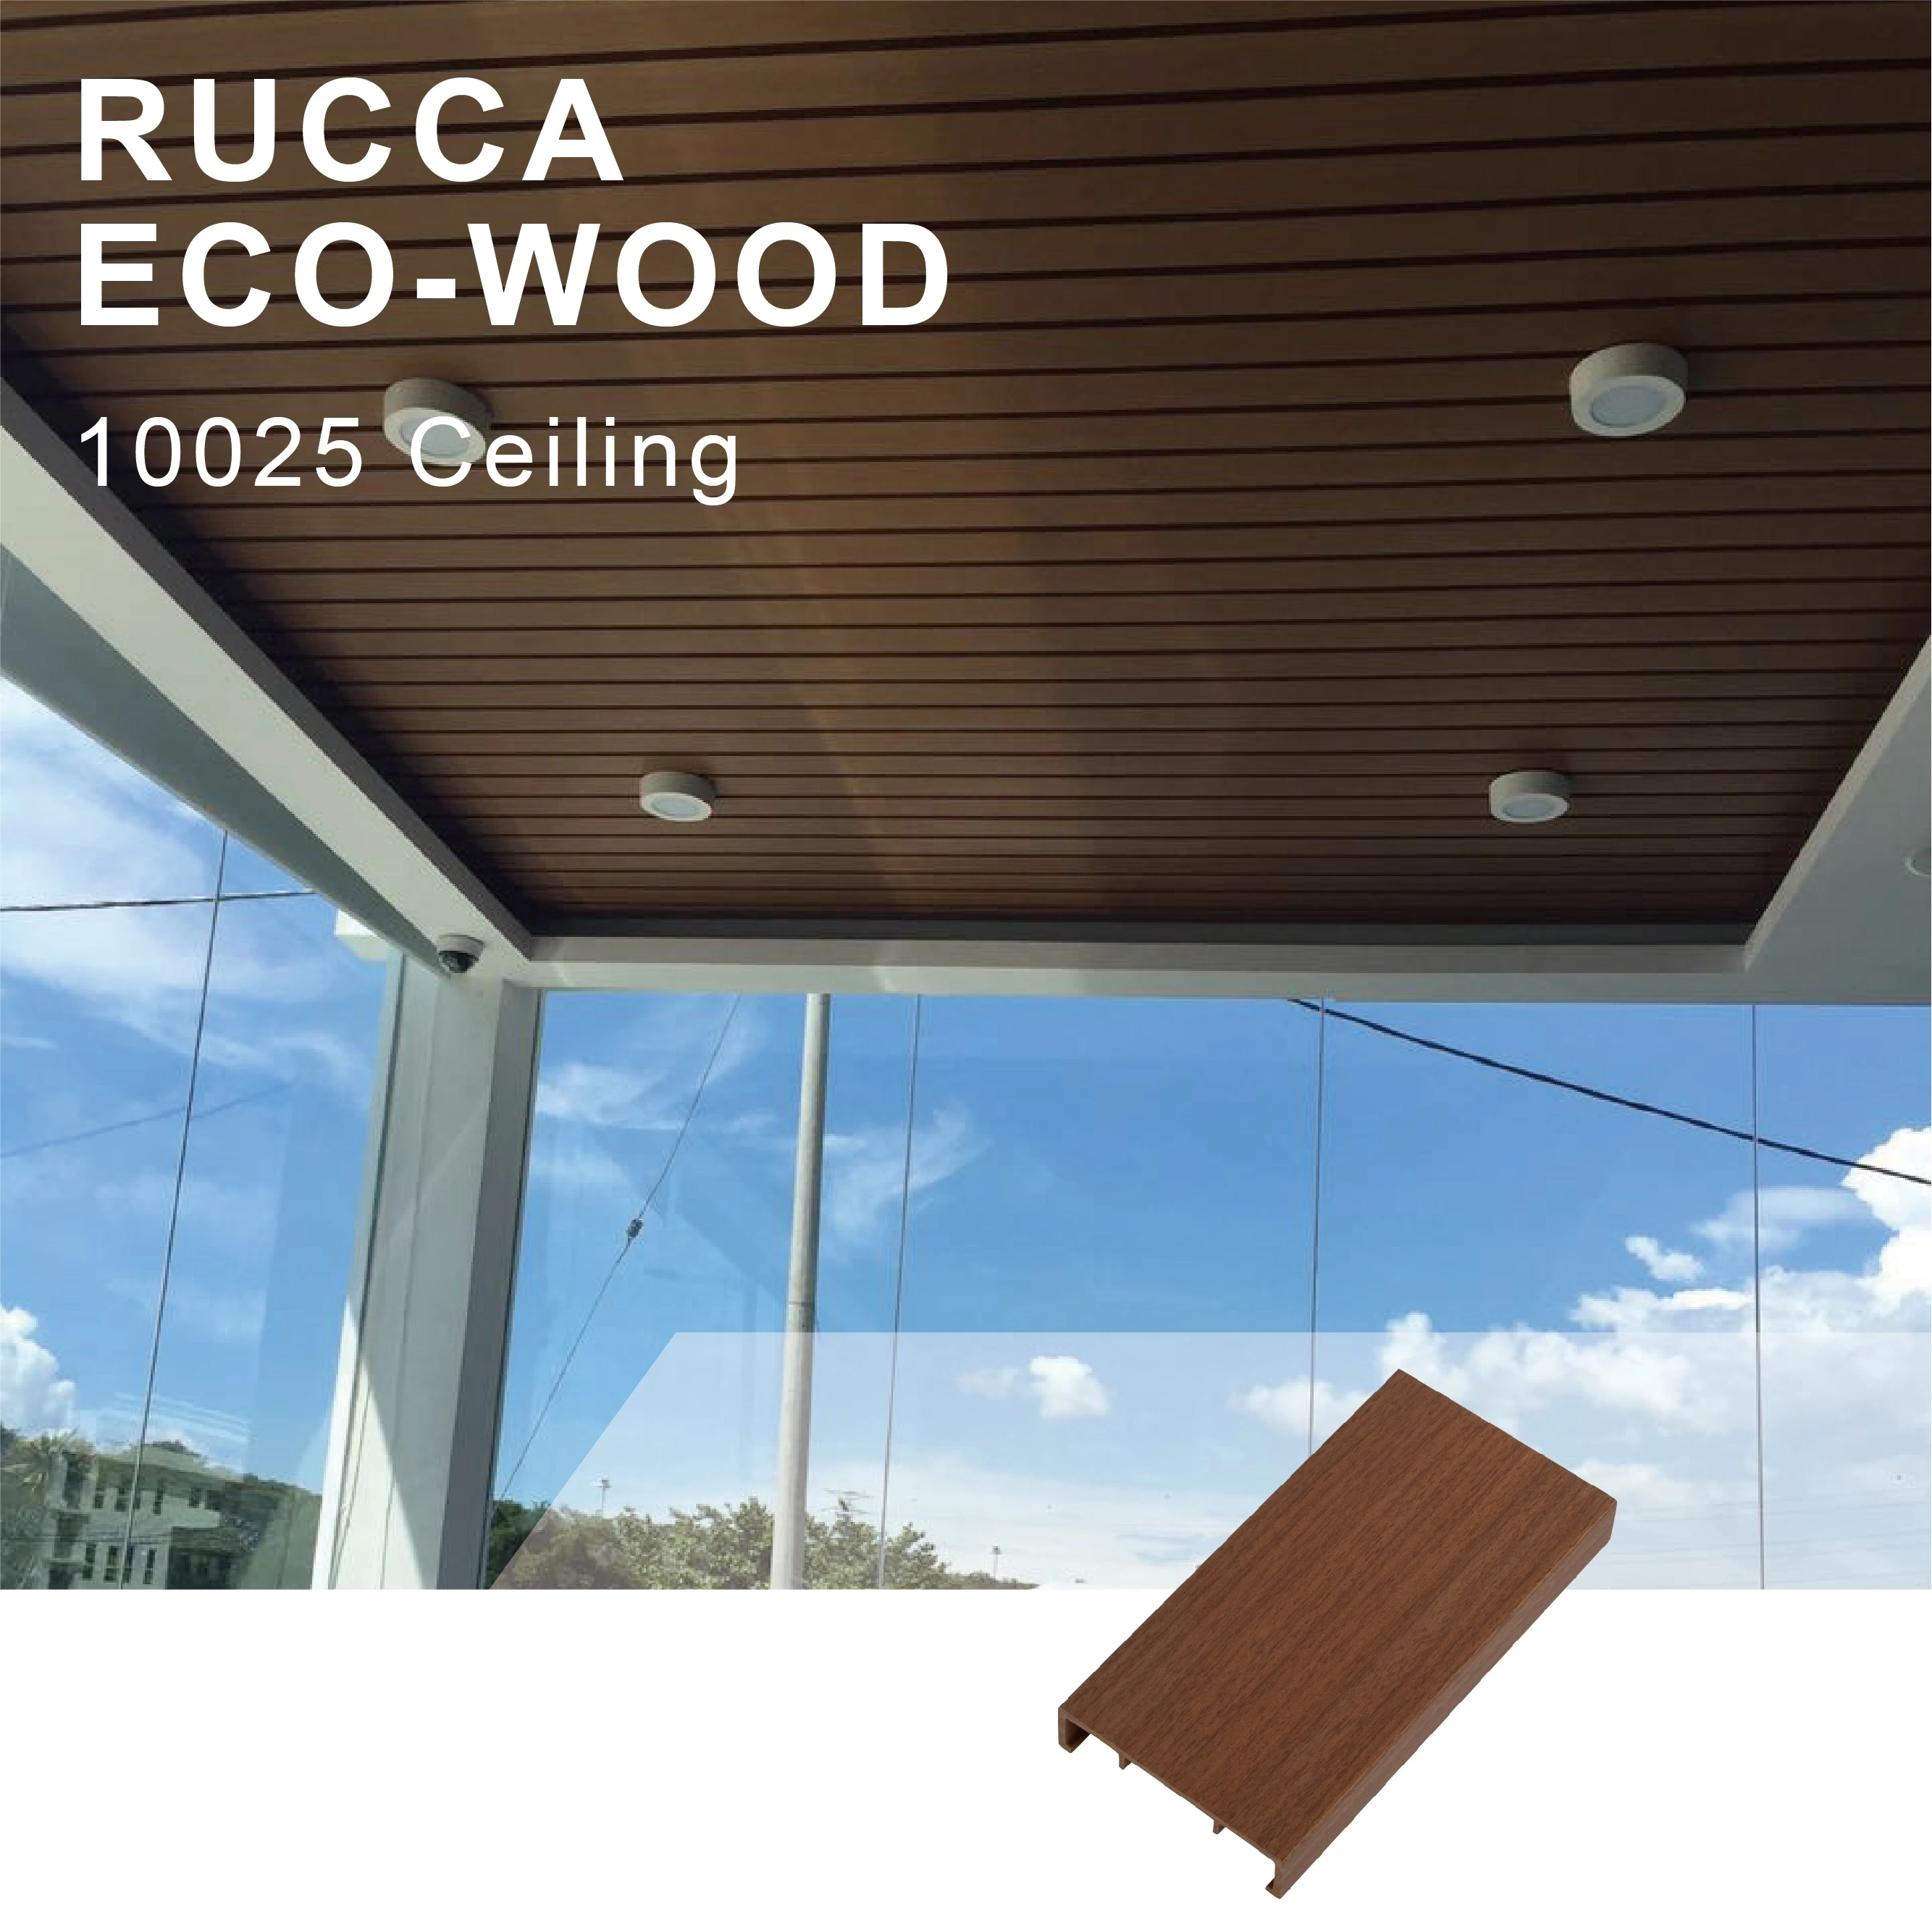 Wpc Wood Plastic Modern False Ceiling Tiles Design 100 25mm Decorative Teak Wood Ceiling Panel View Pvc Ceiling Tiles Rucca Product Details From Foshan Ruccawood Co Ltd On Alibaba Com